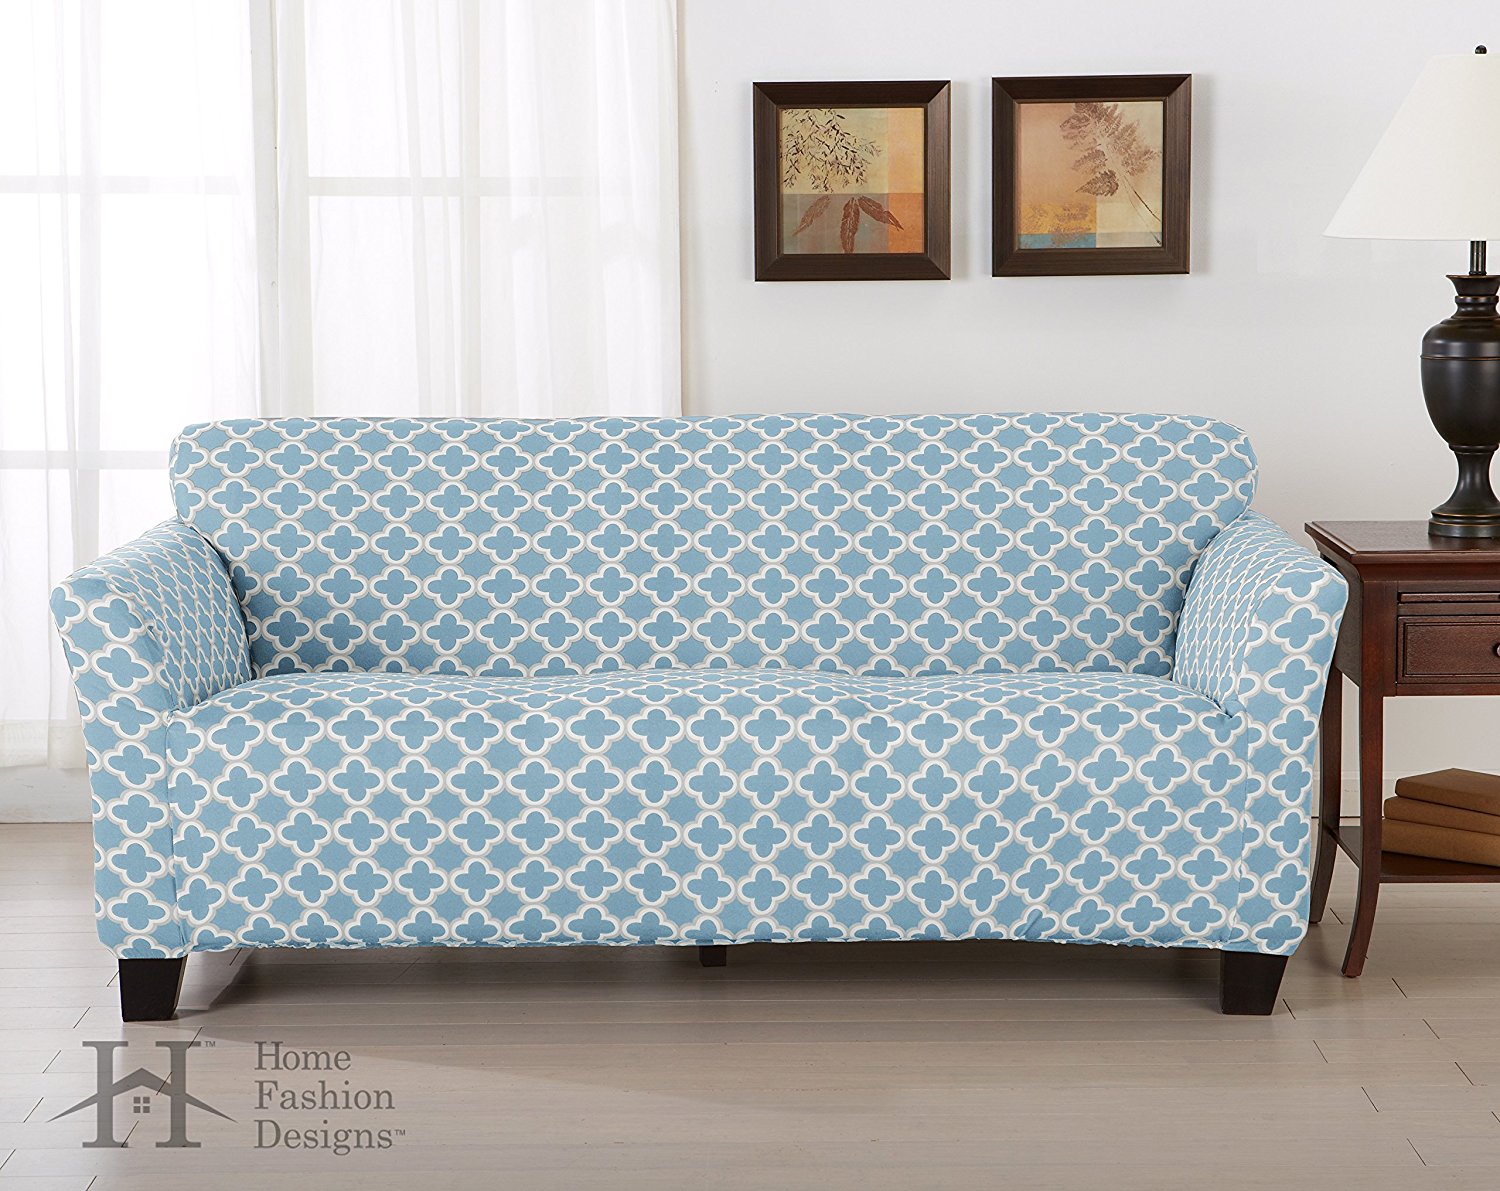 Brenna Collection Basic Strapless Slipcover. Form Fit, Slip Resistant, Stylish Furniture Shield / Protector Featuring Lightweight Twill Fabric. By Home Fashion Designs Brand. (Sofa, Blue)